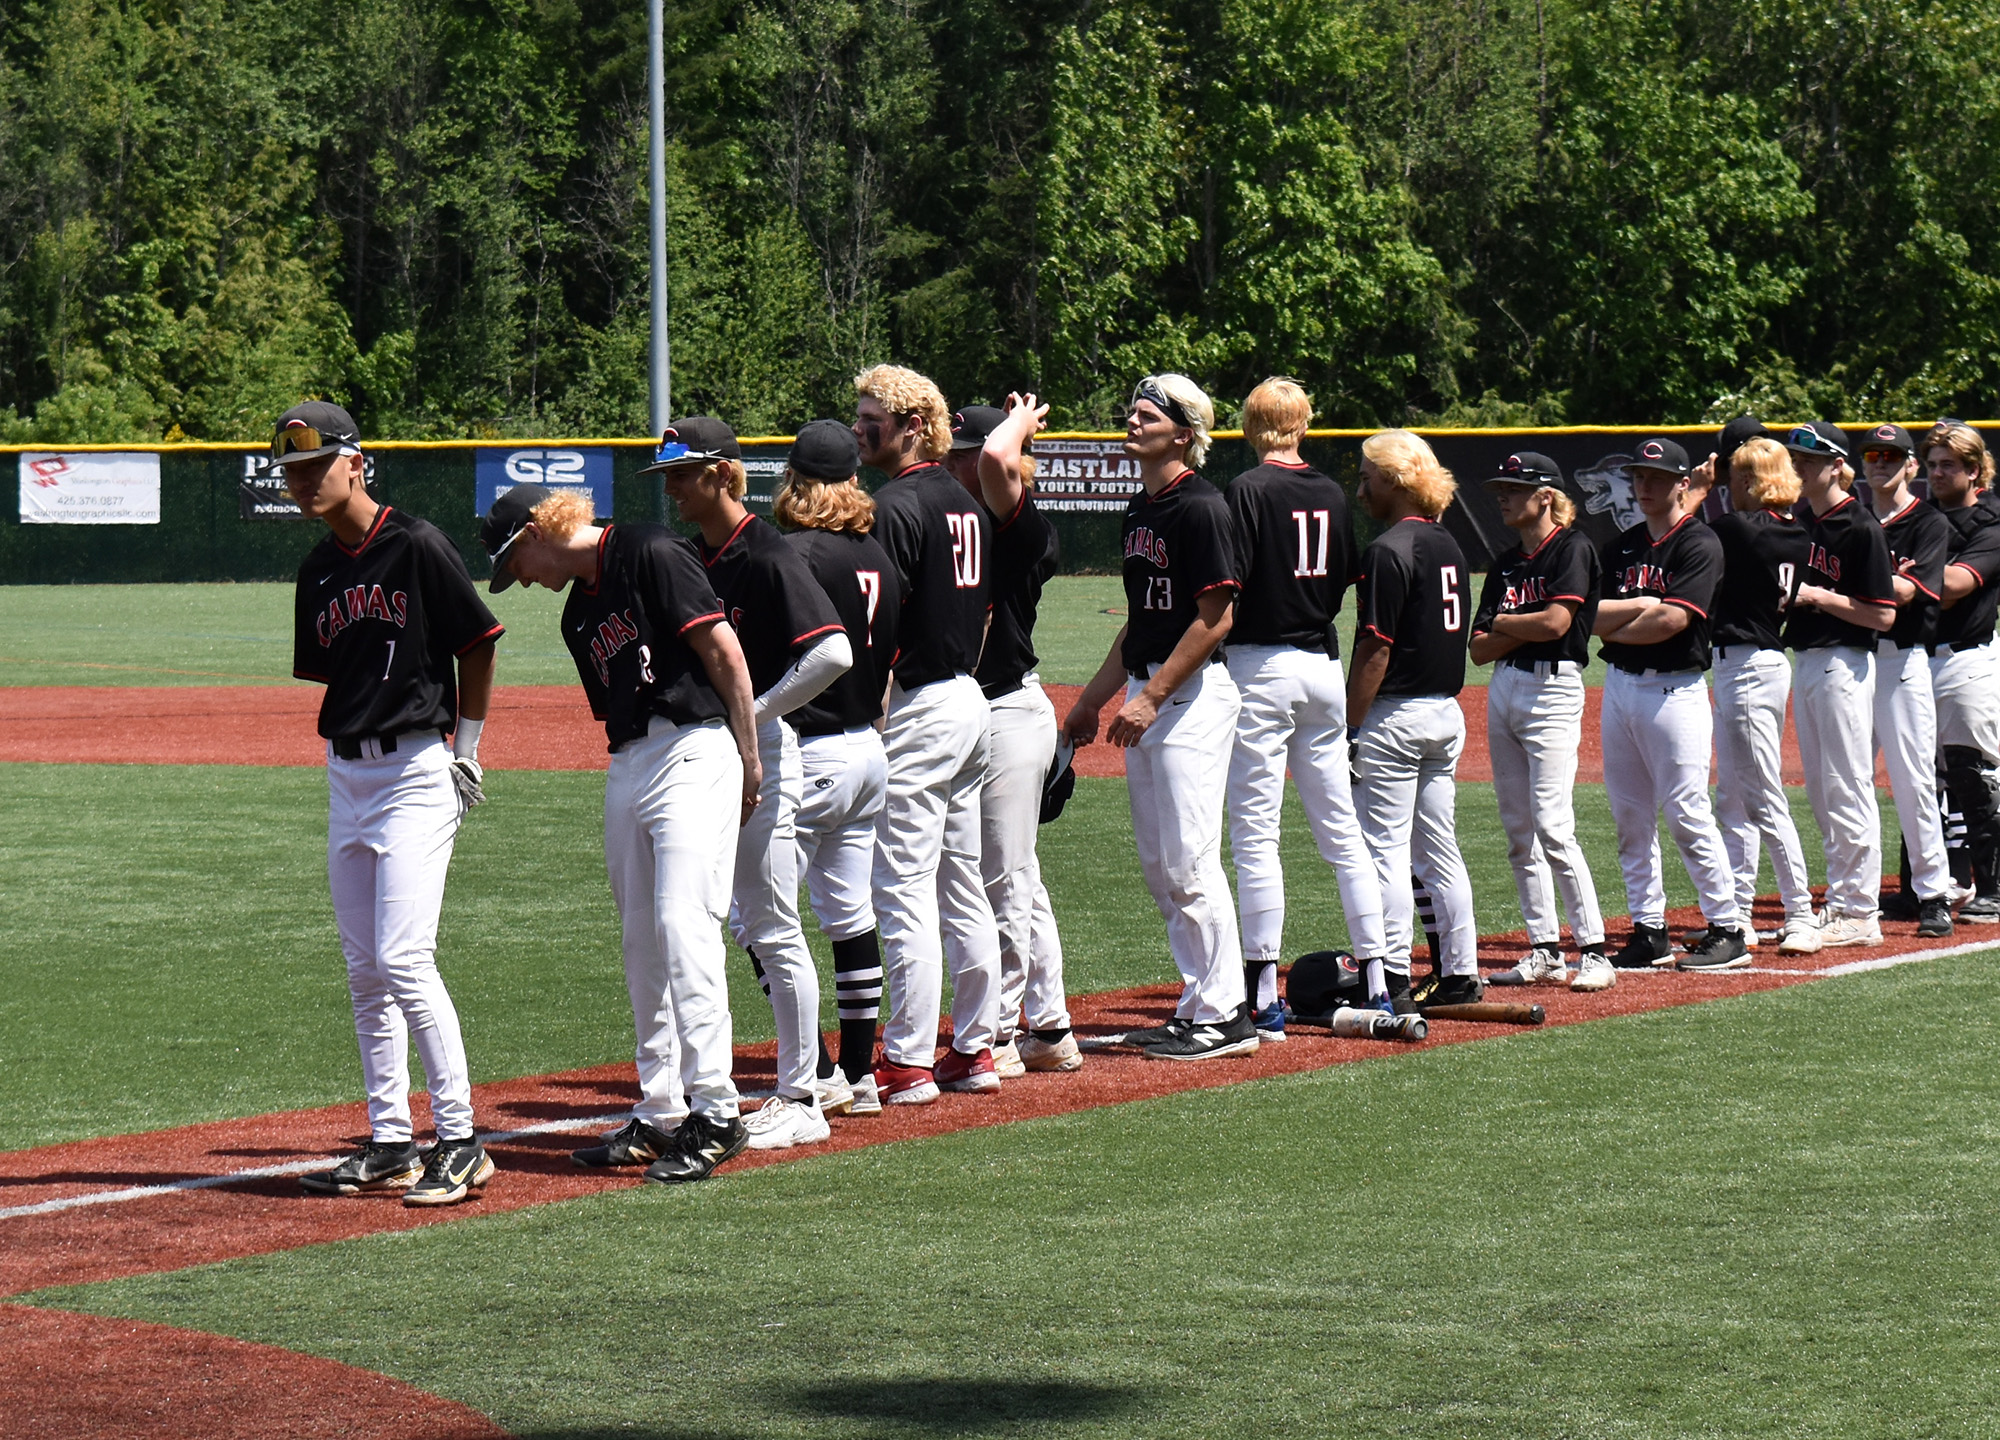 The Camas baseball team lines up prior to its Class 4A state tournament game against Kamiakin at Eastlake High School in Sammamish on Saturday, May 20, 2023.